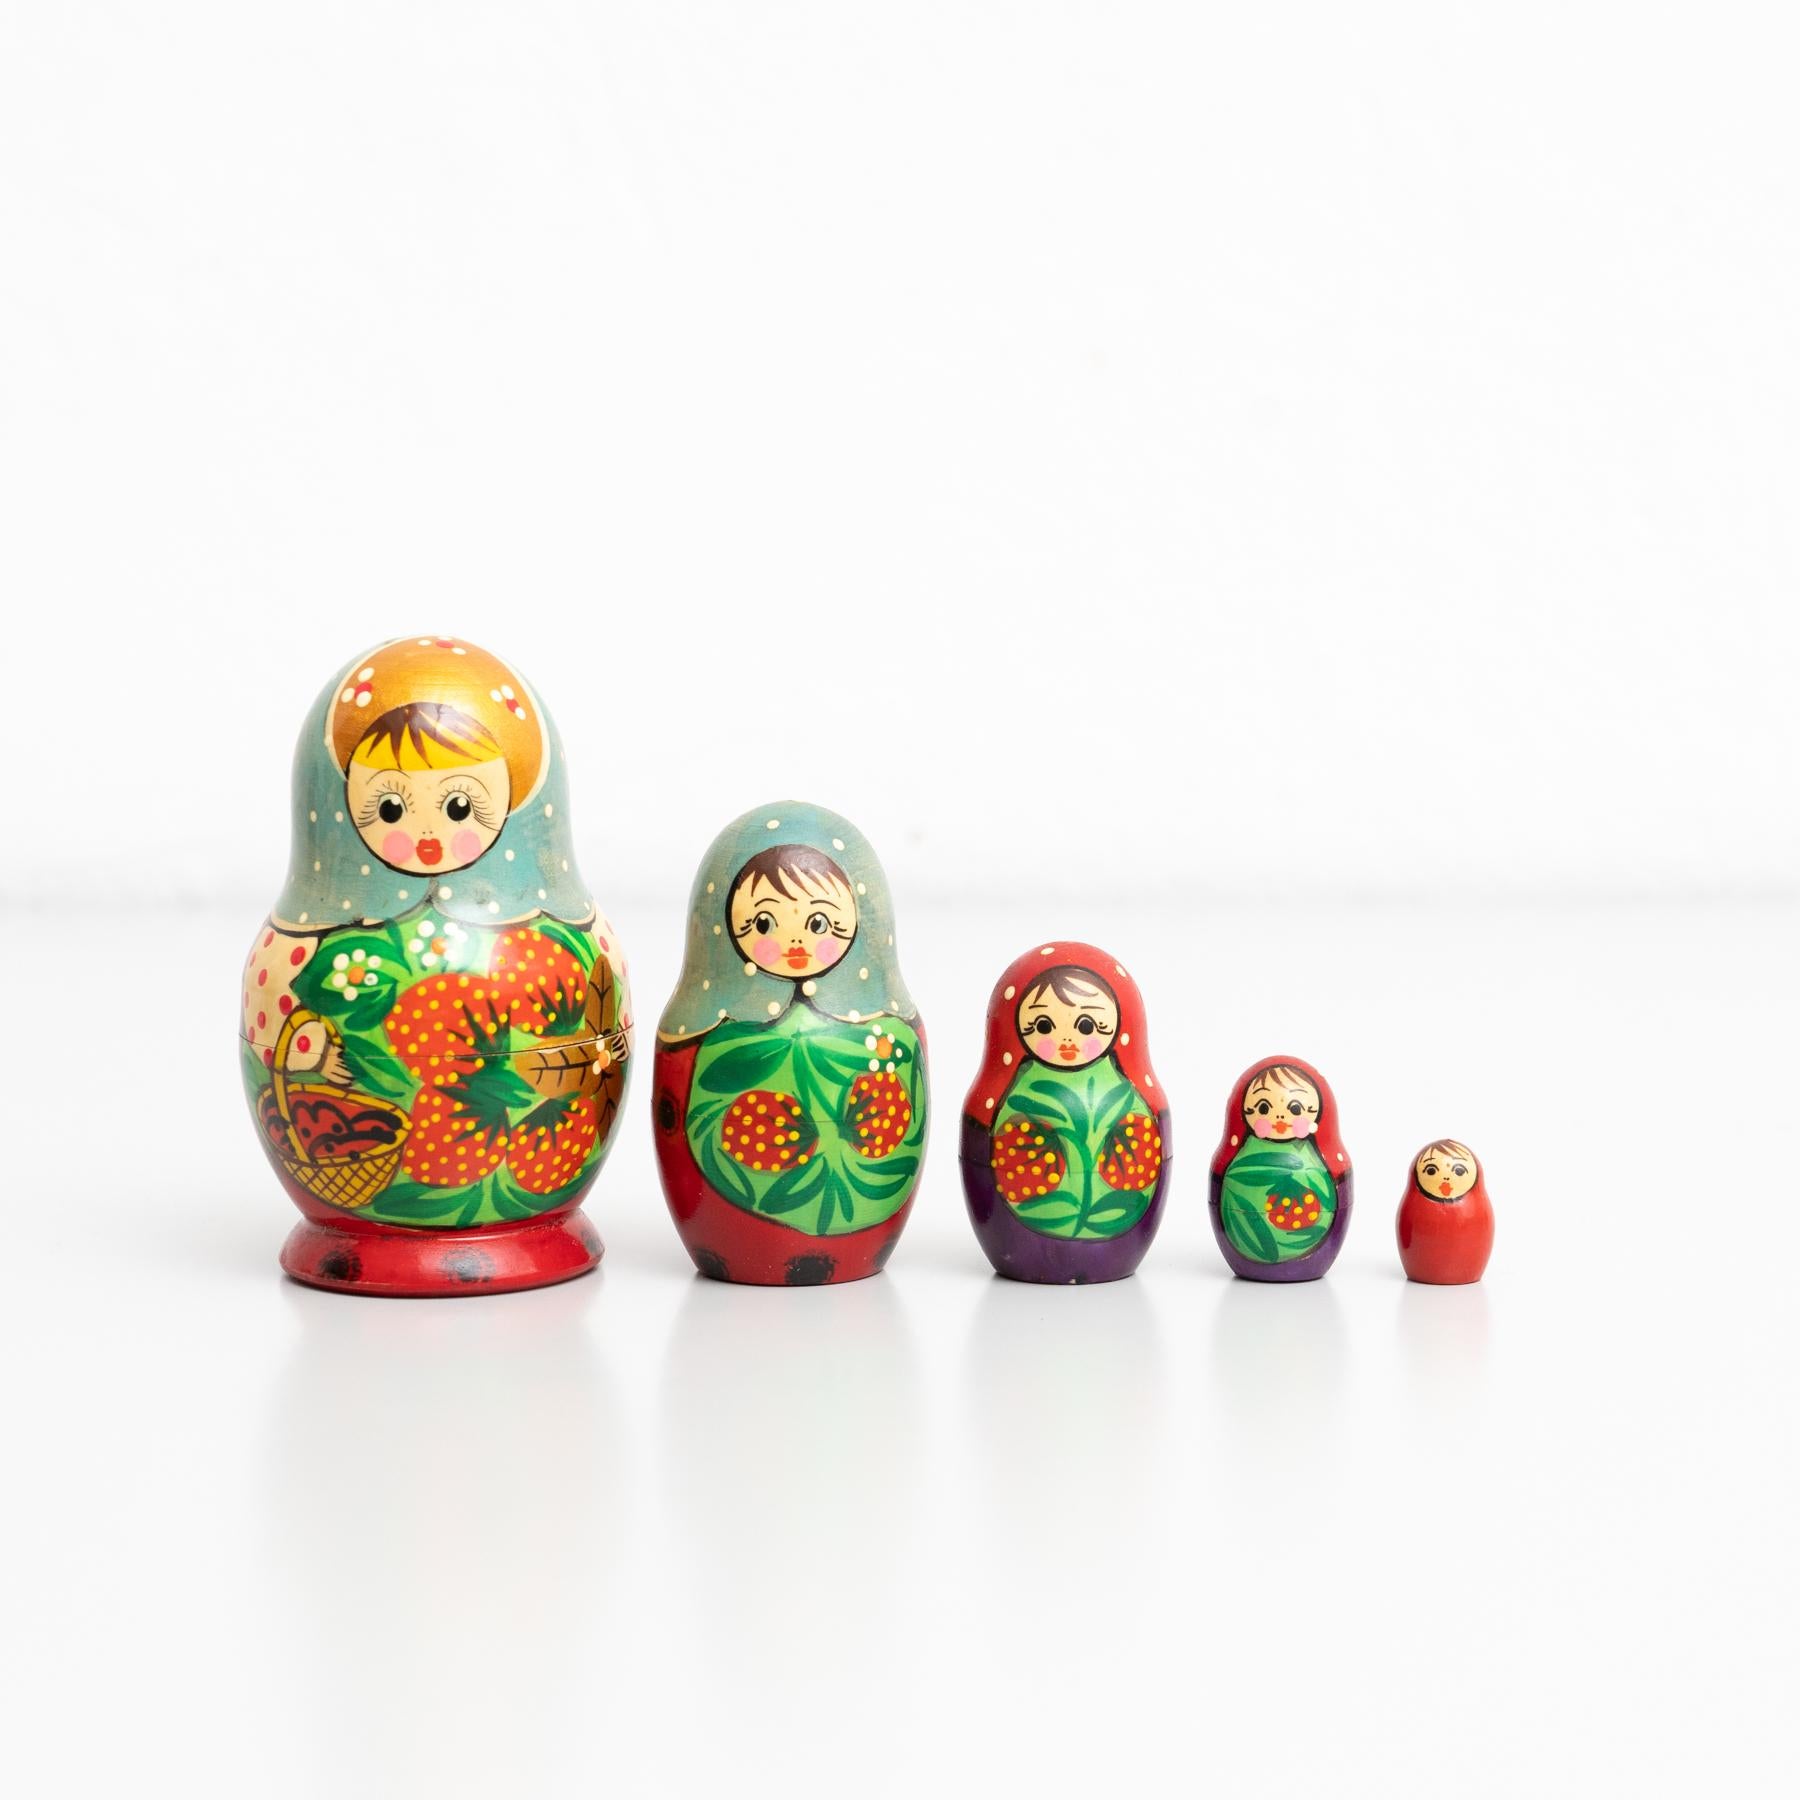 Antique Traditional Hand-Painted Wooden Russian Doll, circa 1960 For Sale 9